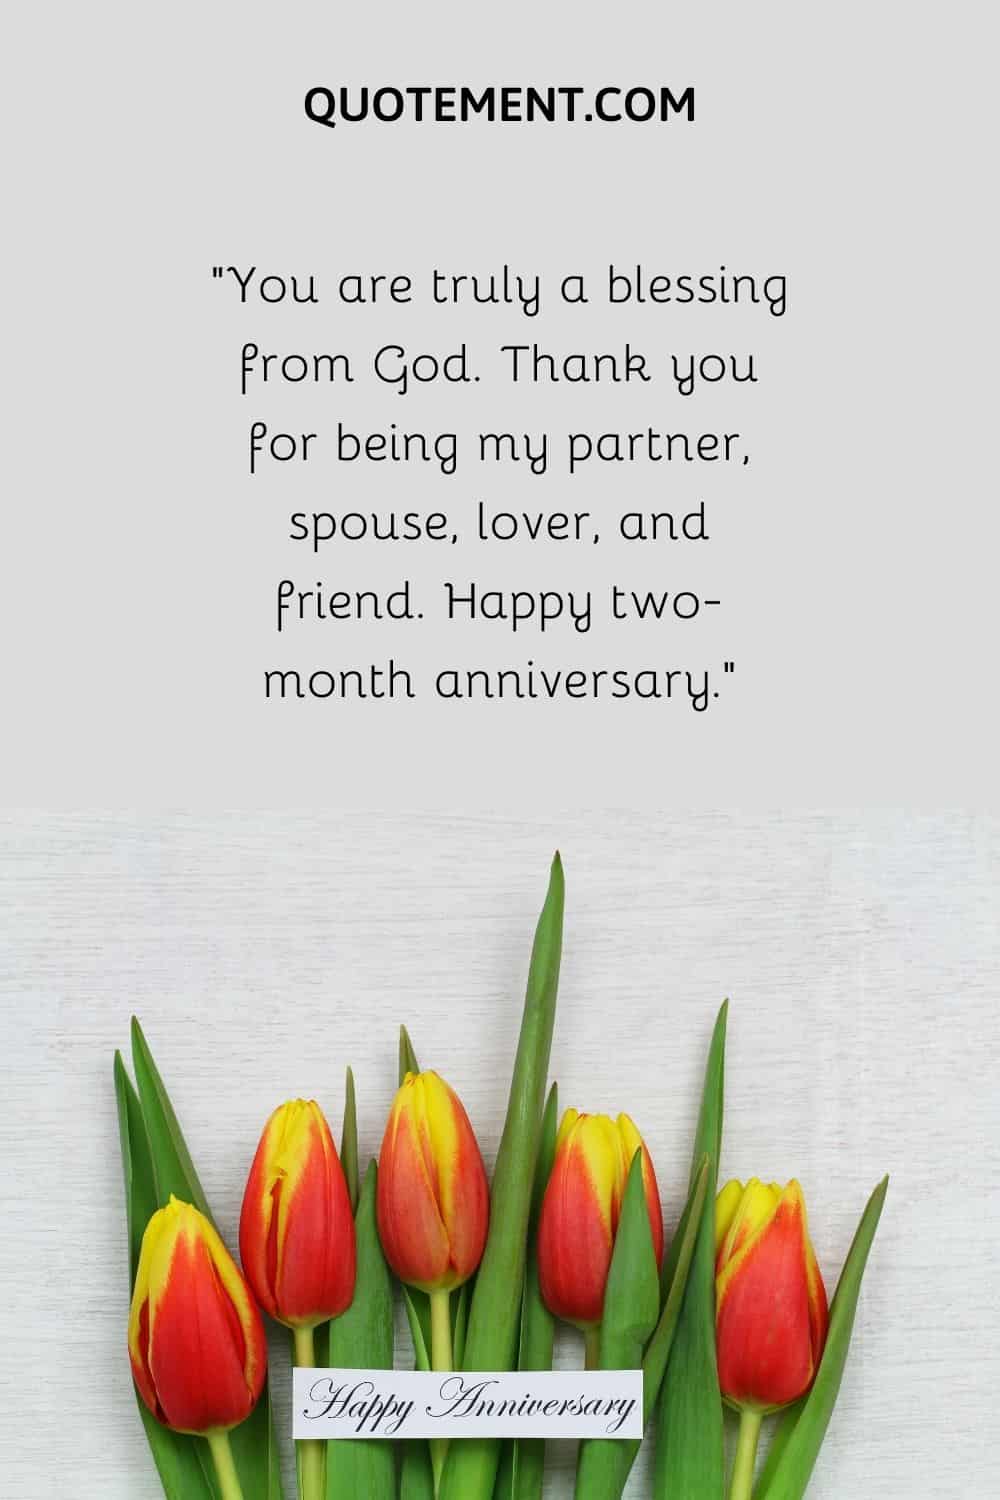 “You are truly a blessing from God. Thank you for being my partner, spouse, lover, and friend. Happy two-month anniversary.”